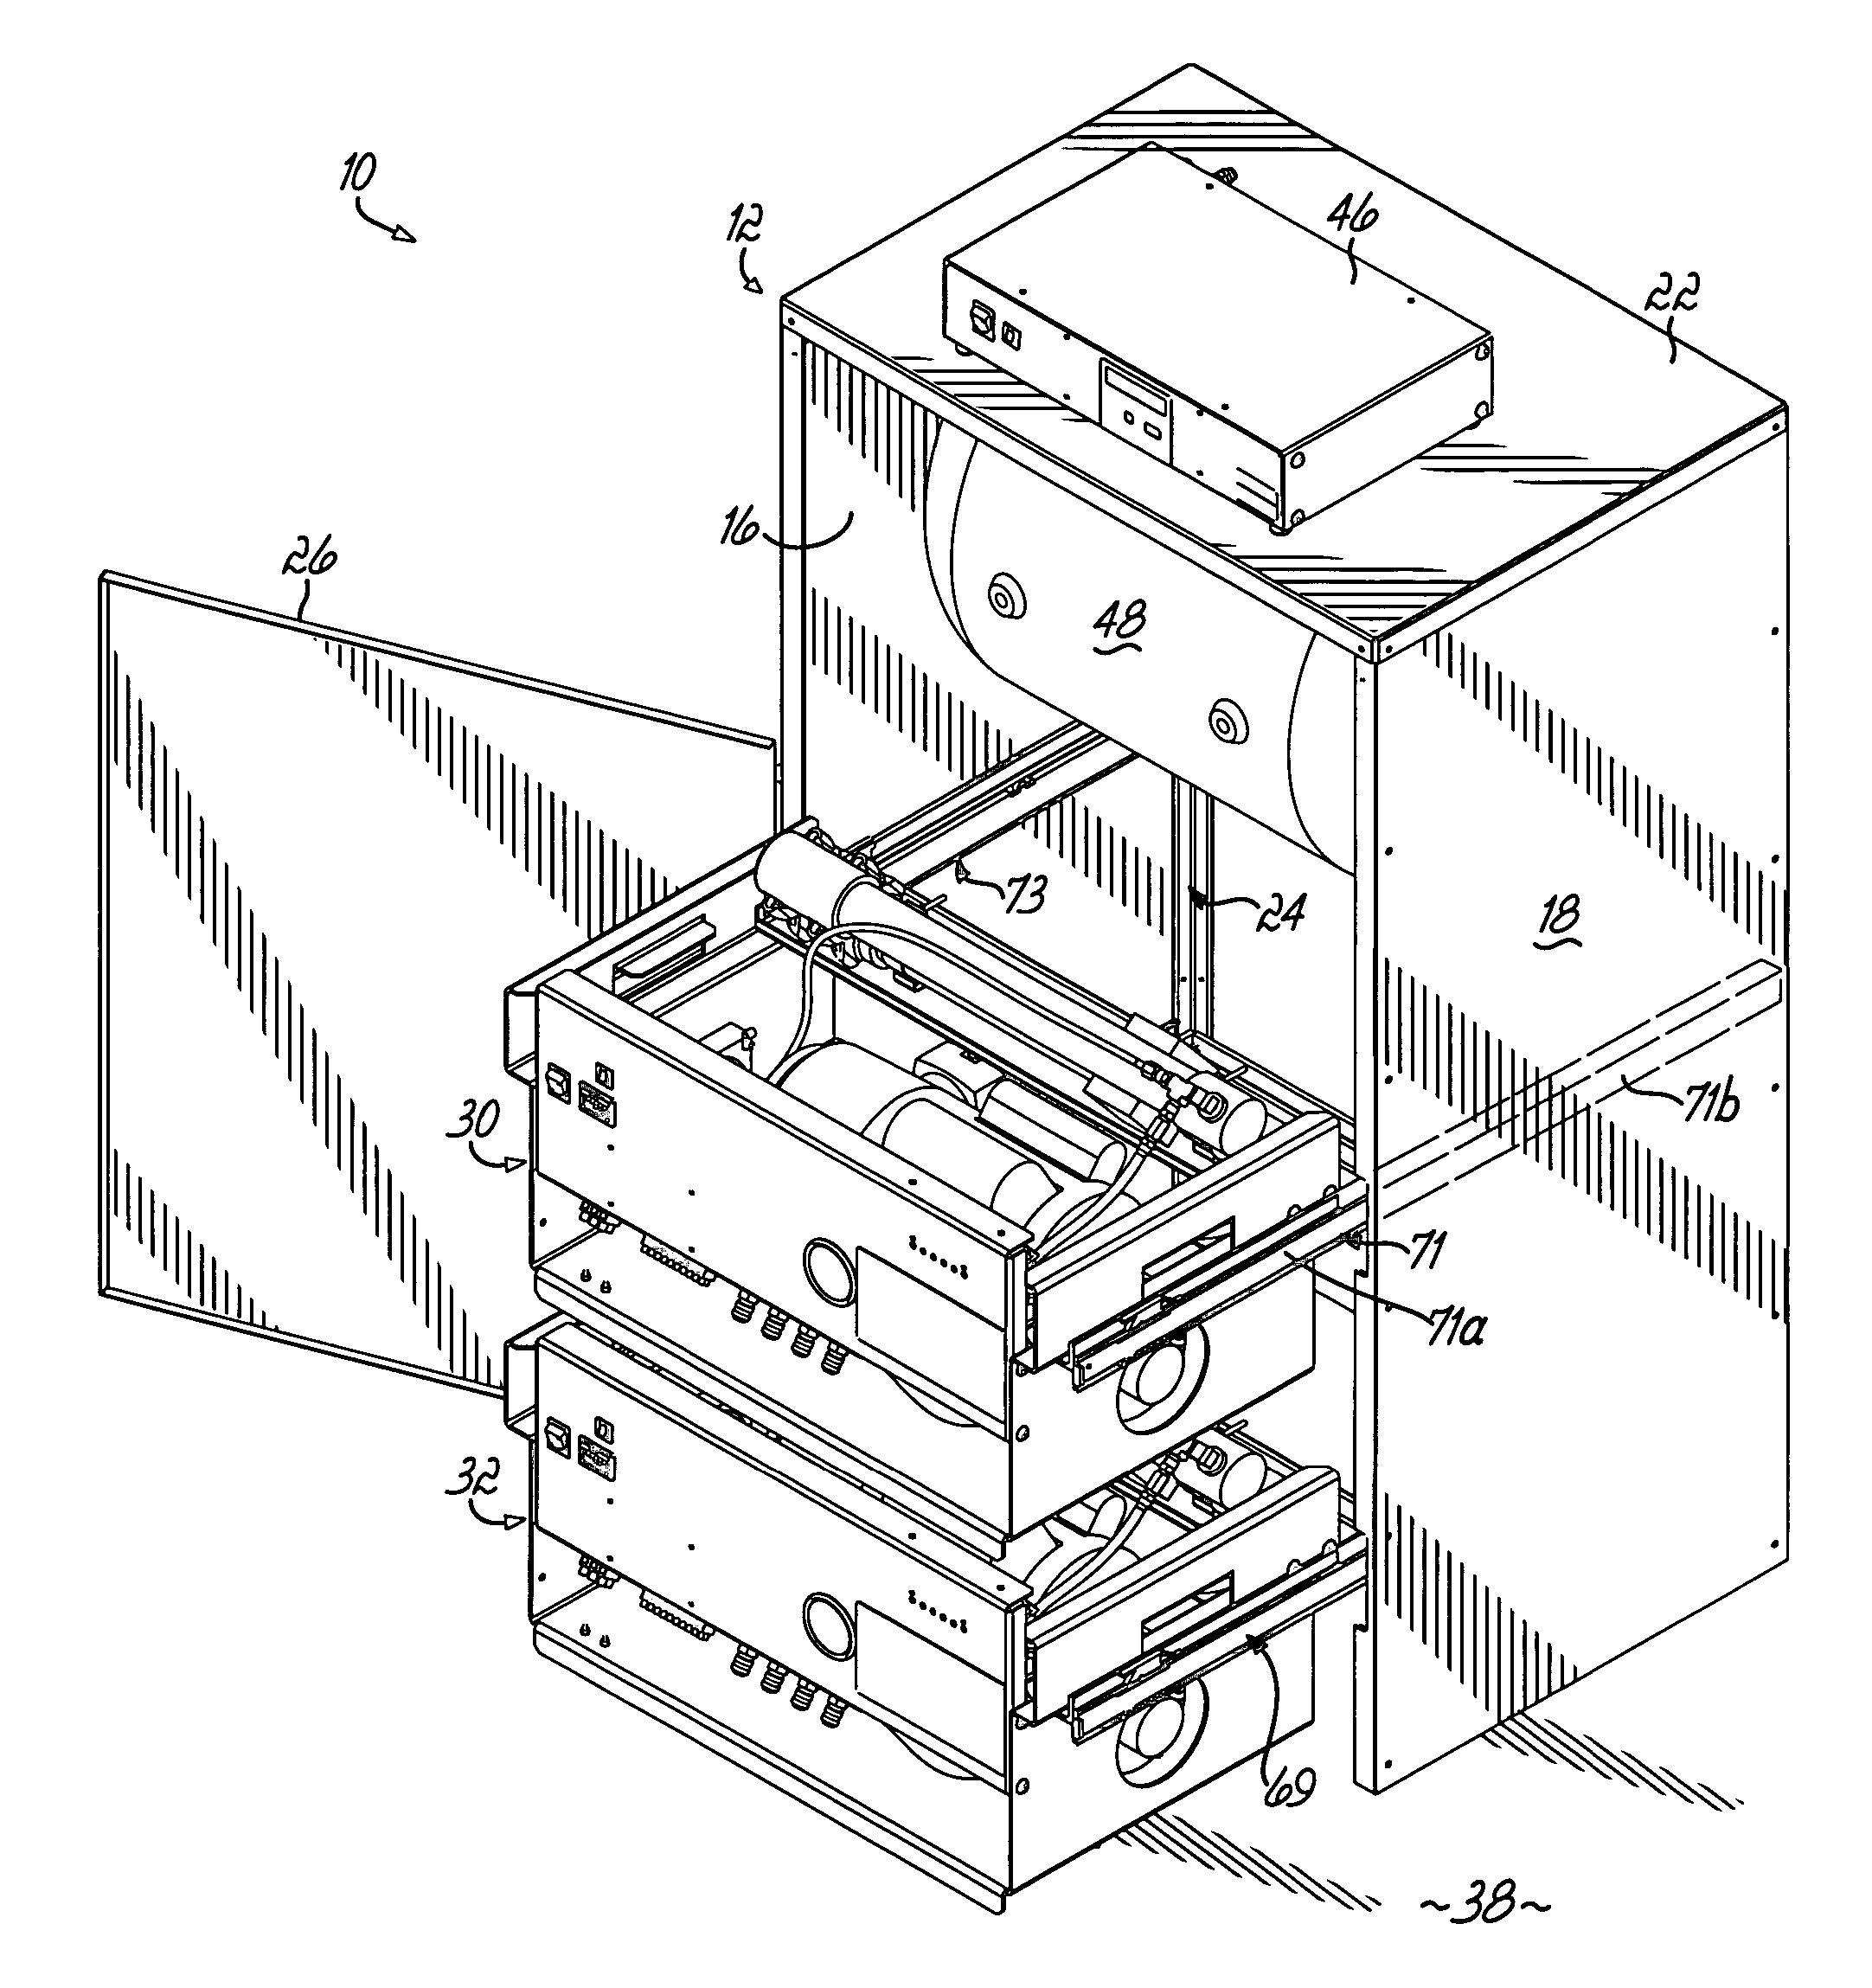 Dry gas production systems for pressurizing a space and methods of operating such systems to produce a dry gas stream